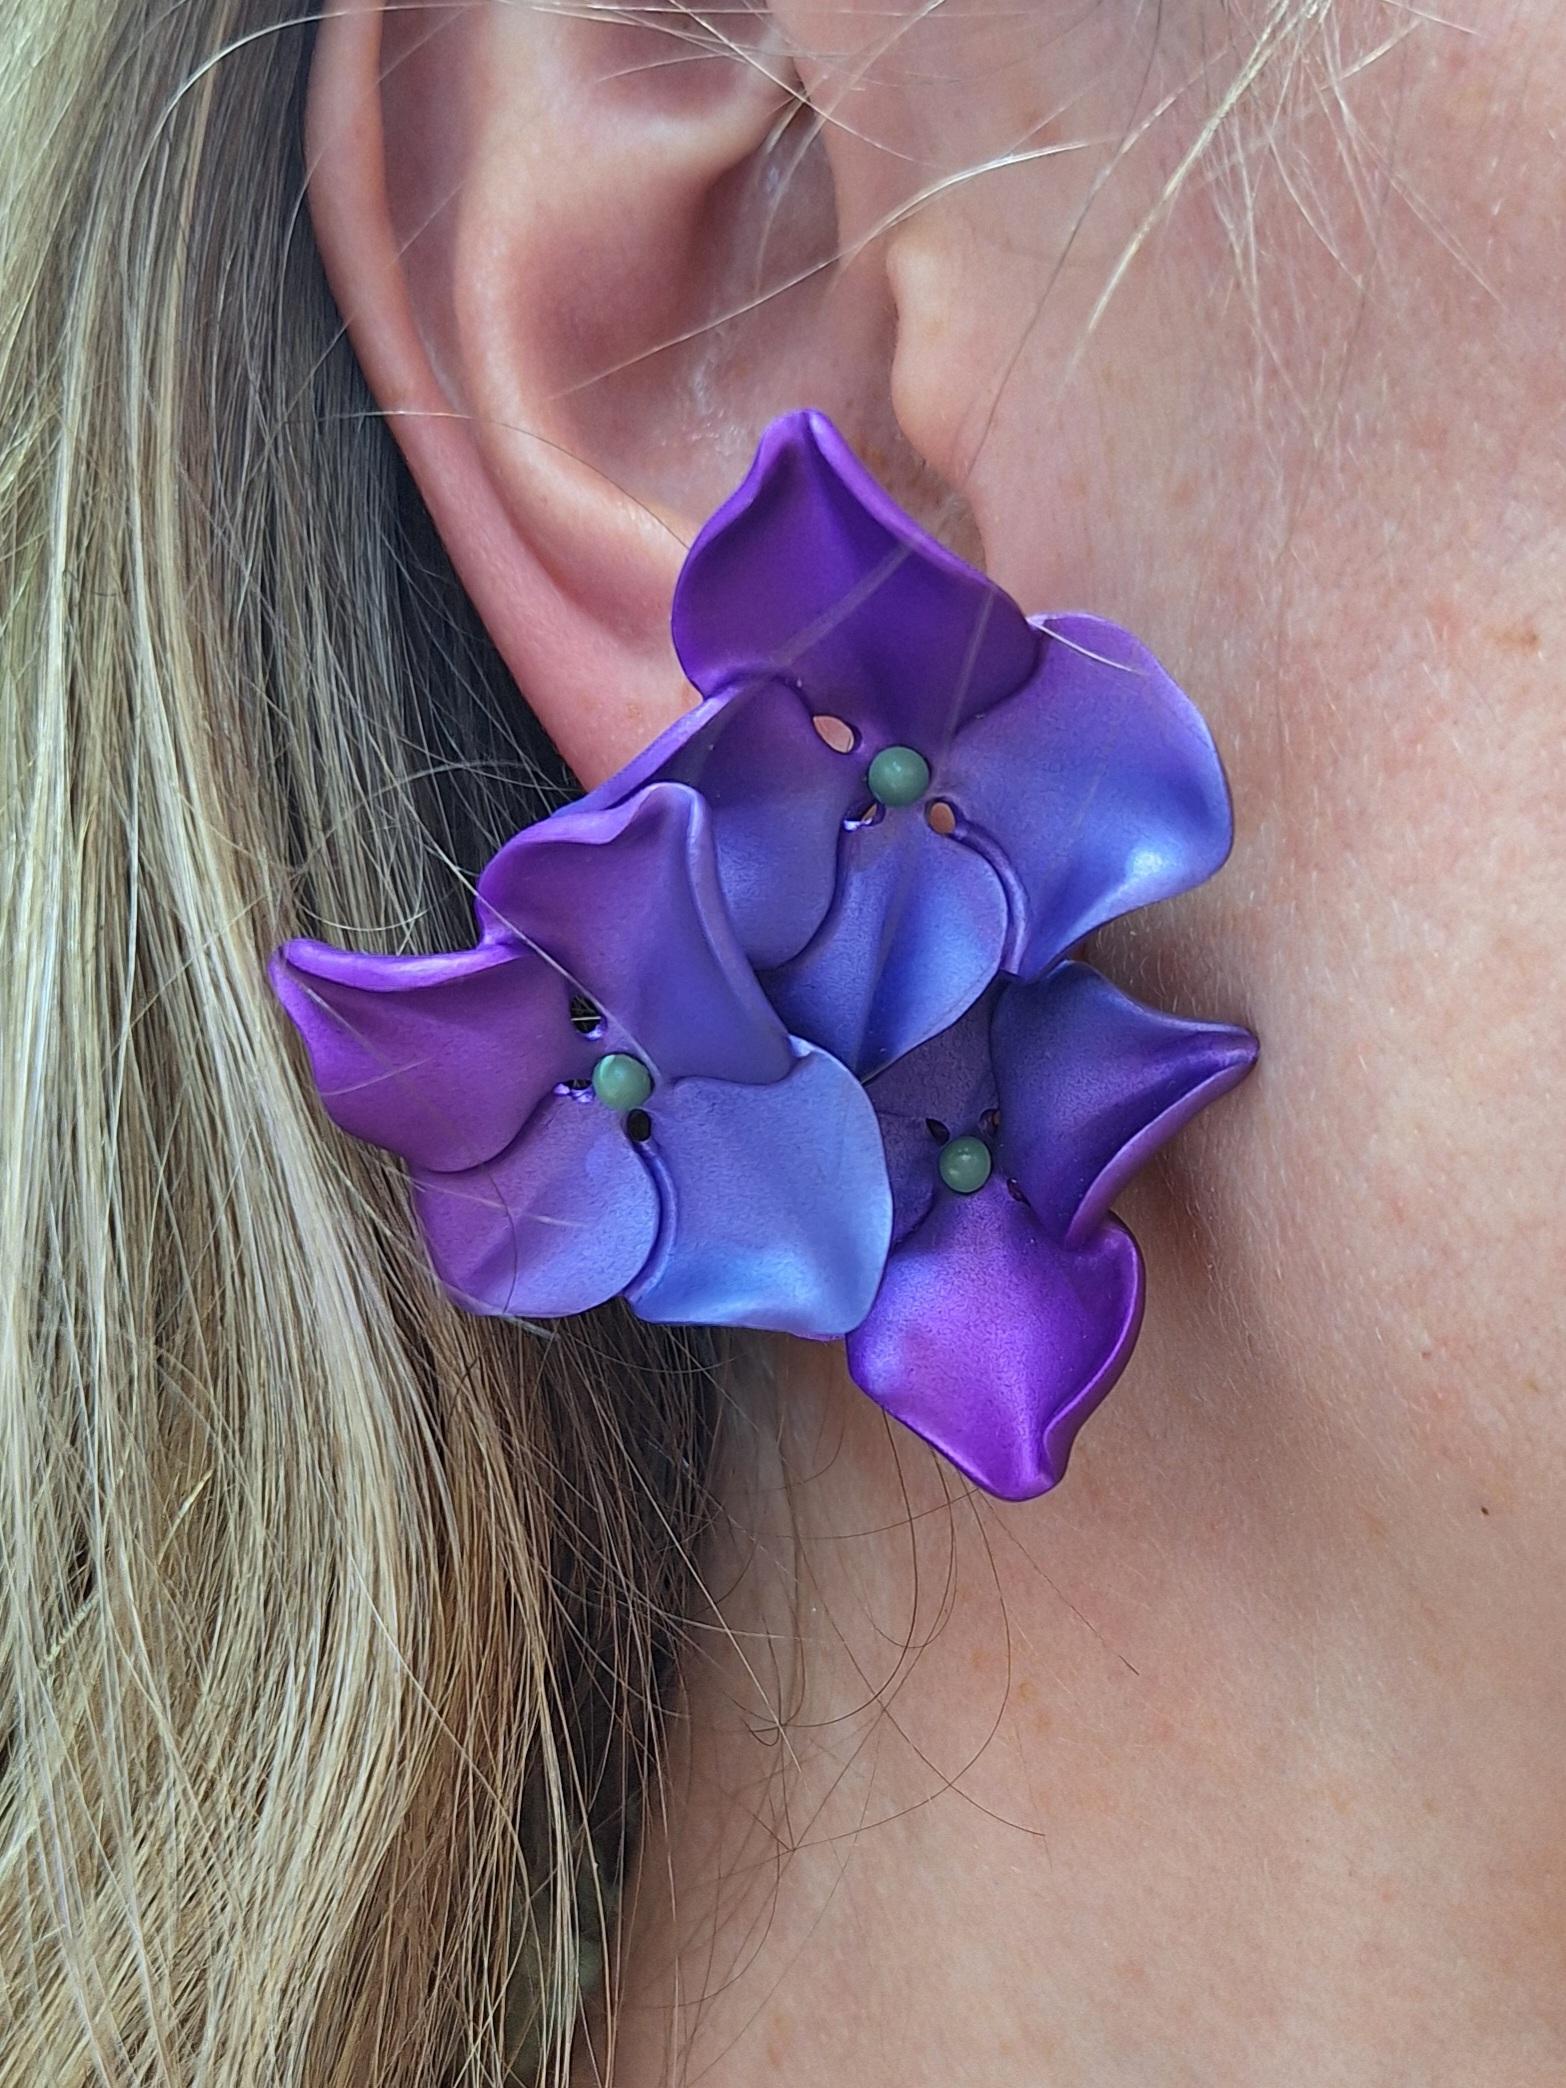 Jar Paris Pink and Purple Hydrangea Flower, Aluminum & Gold Earrings

Designed as a three hydrangea flower, fusing with pink and purple petals and with gold and green sepals. Mounted in aluminum and 18k yellow gold with the omega clip backs.